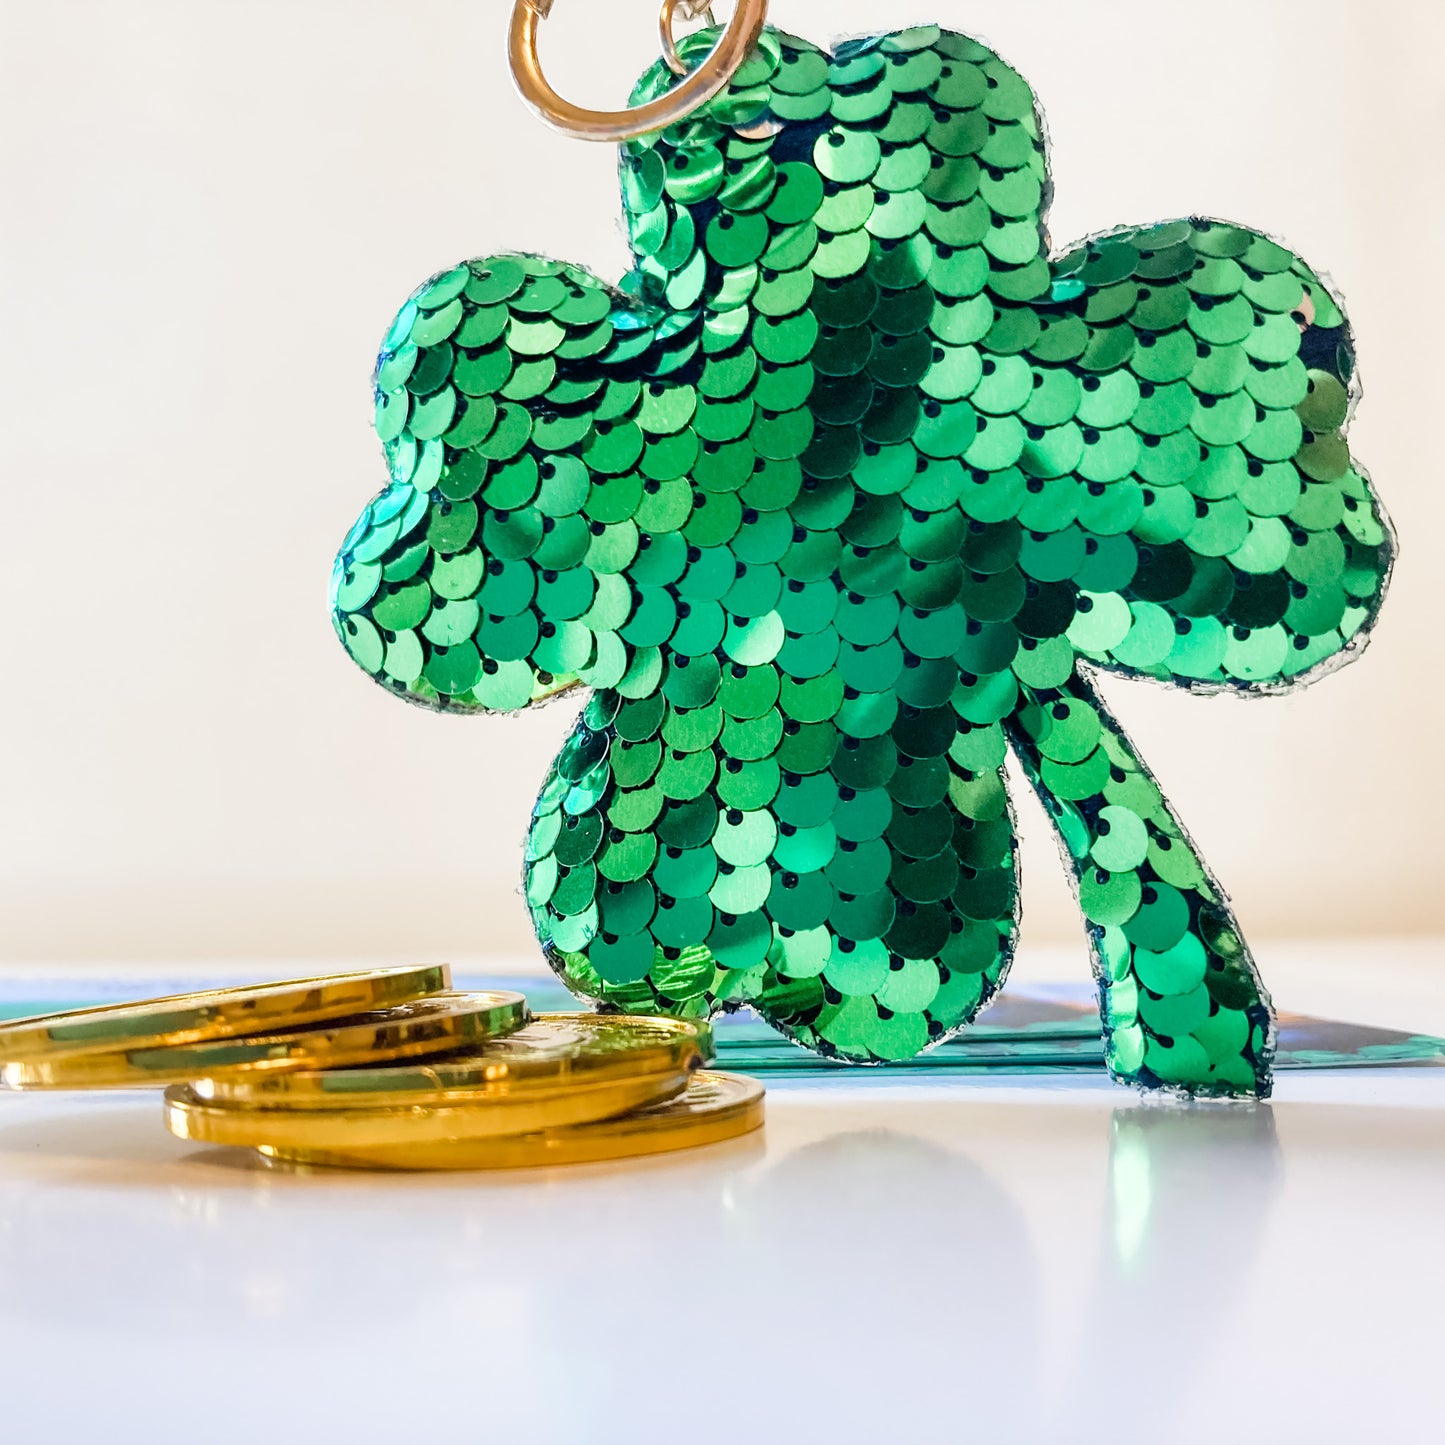 Four-Leaf Clover Keychain with Green/Silver flip sequins - BOGO 1/2 Off this week!